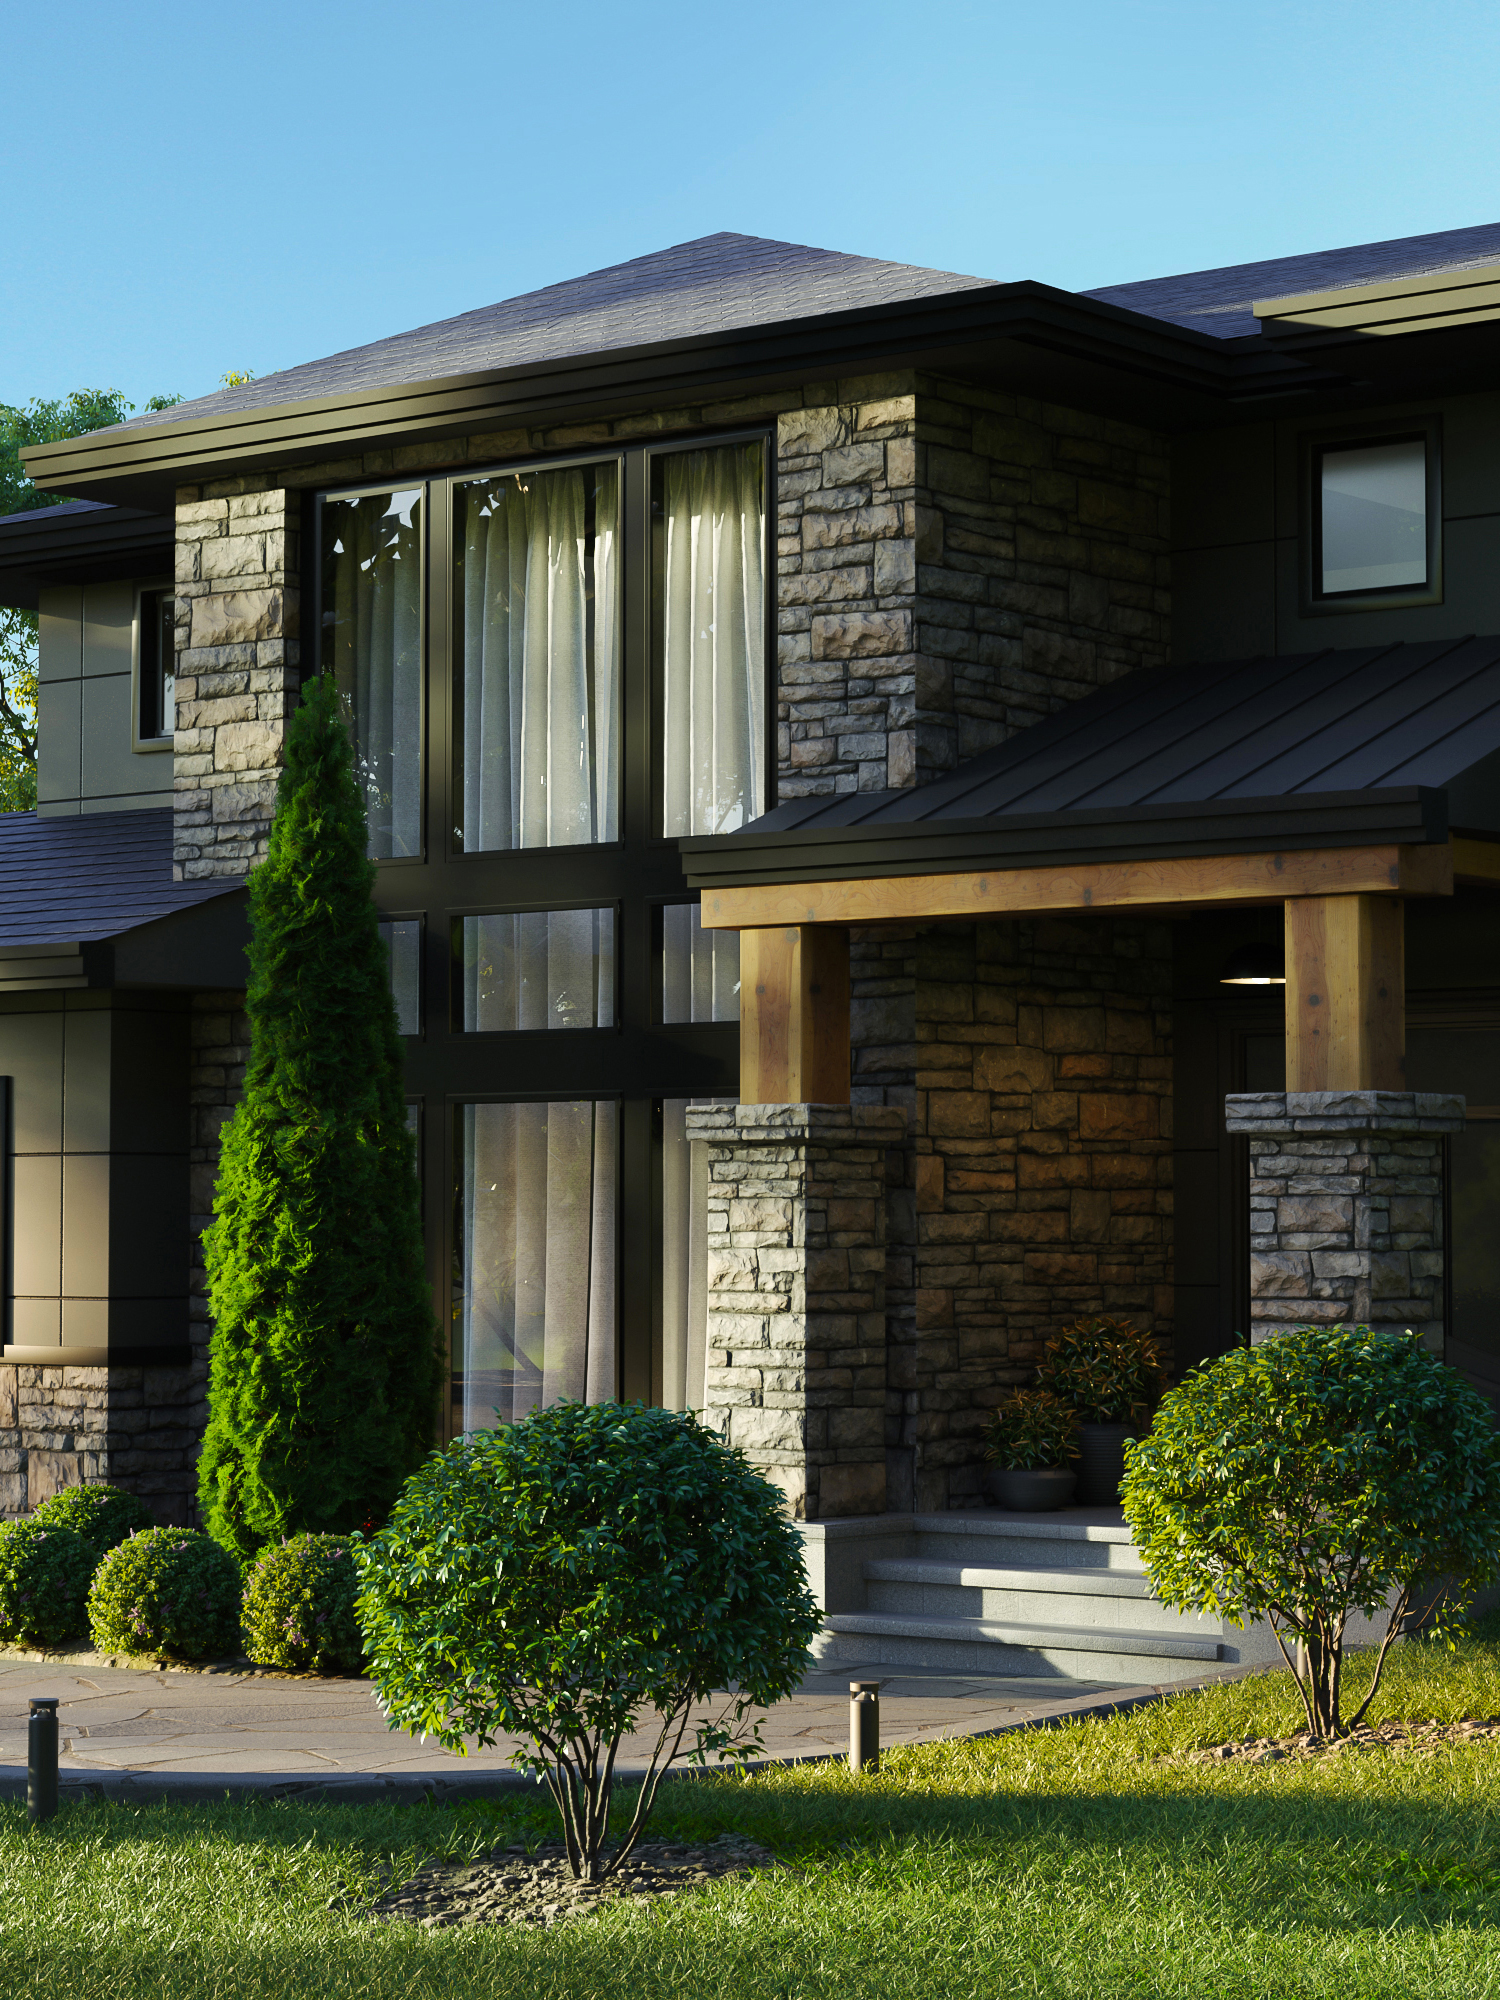 Transform Your Ideas into Stunning 3D Models with Our Rendering Services